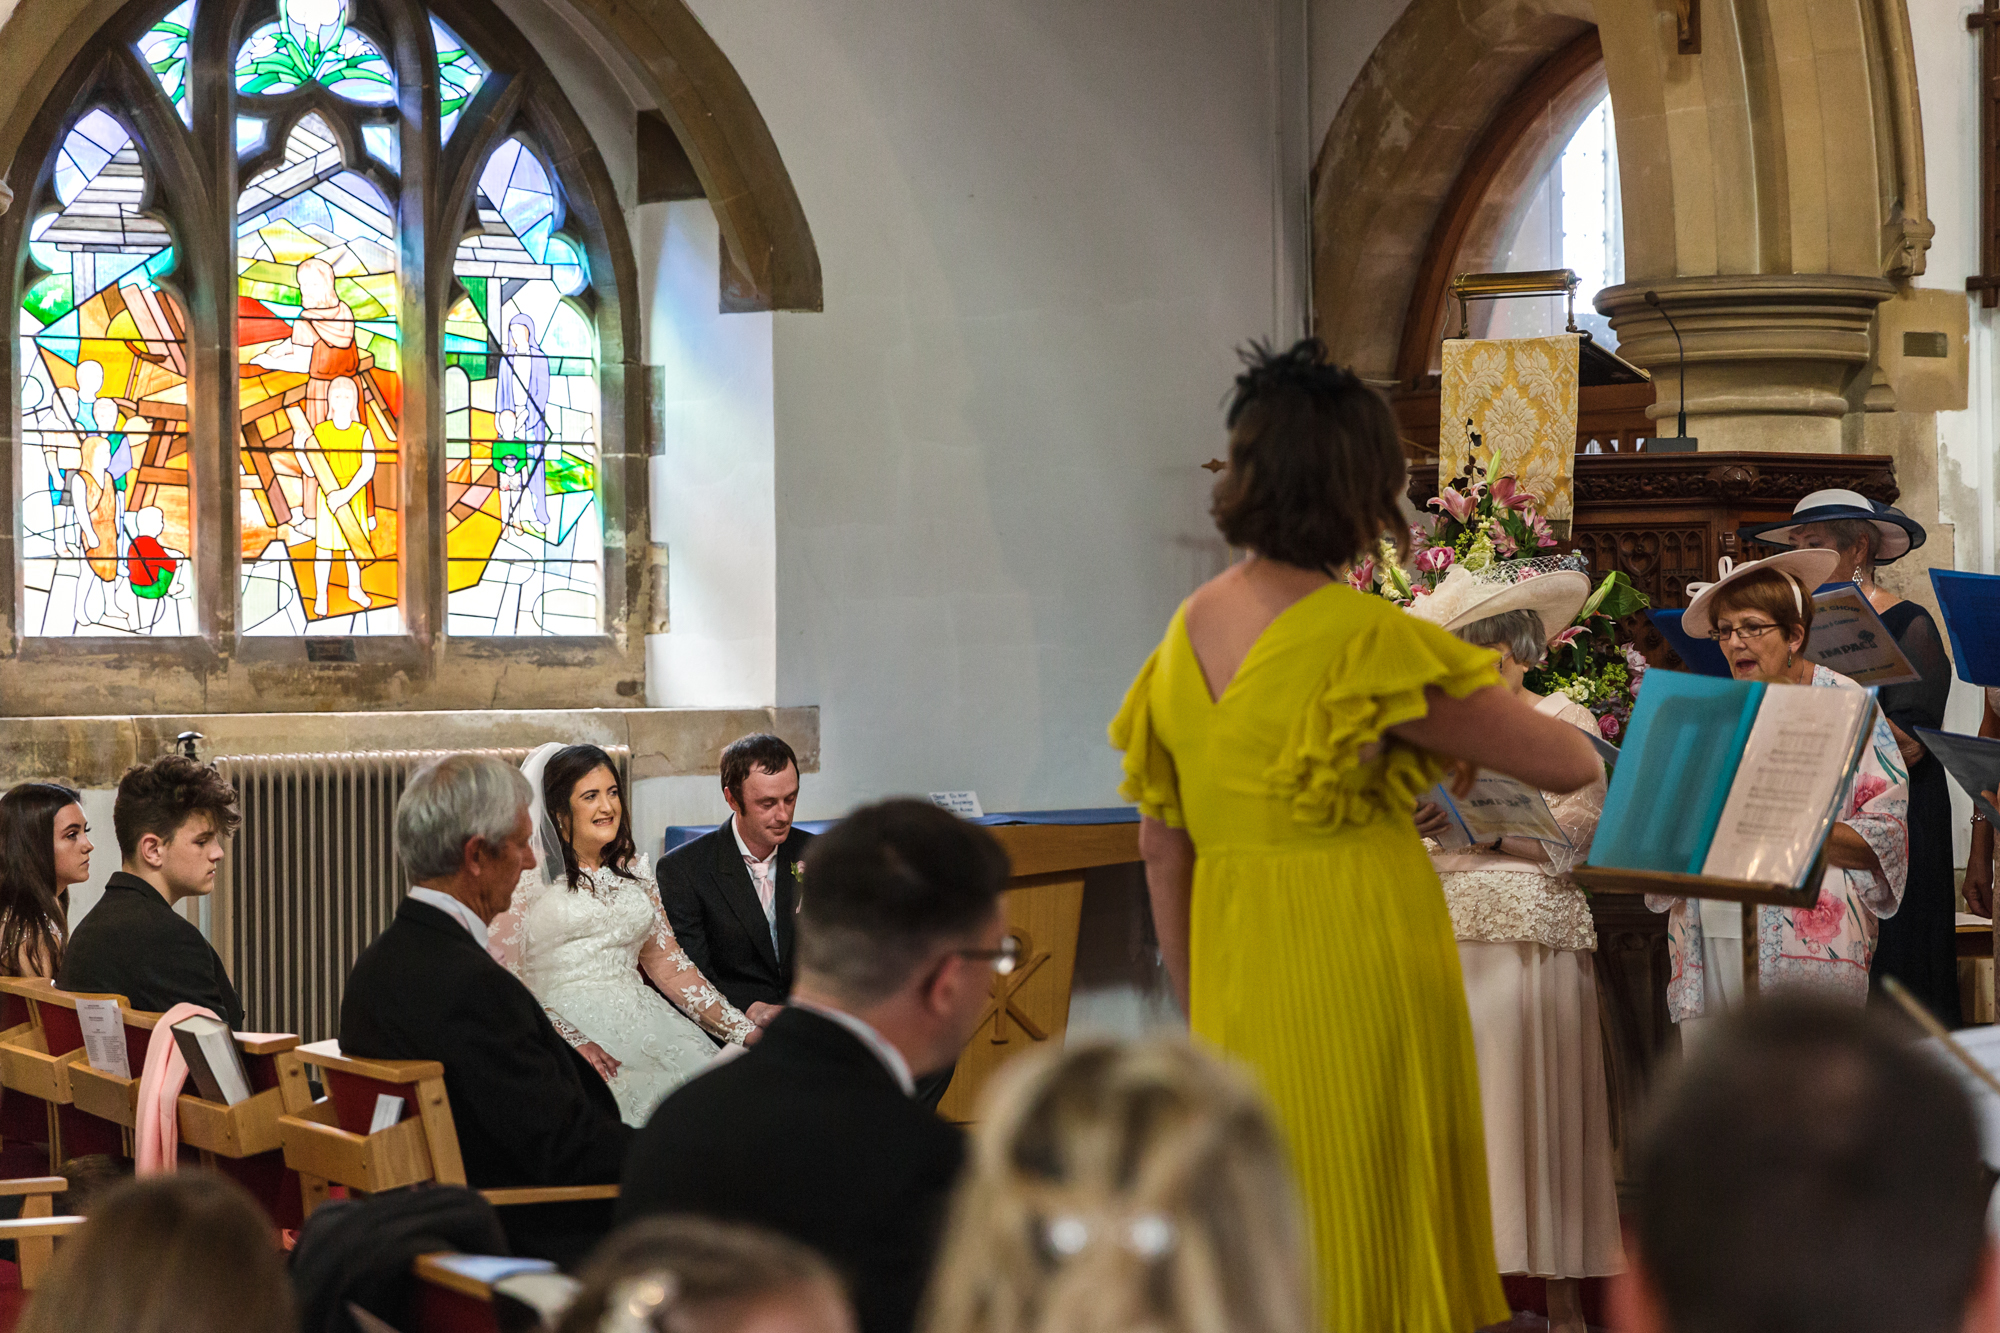 South Wales wedding photographer covering Caerphilly, Cardiff and surrounding areas